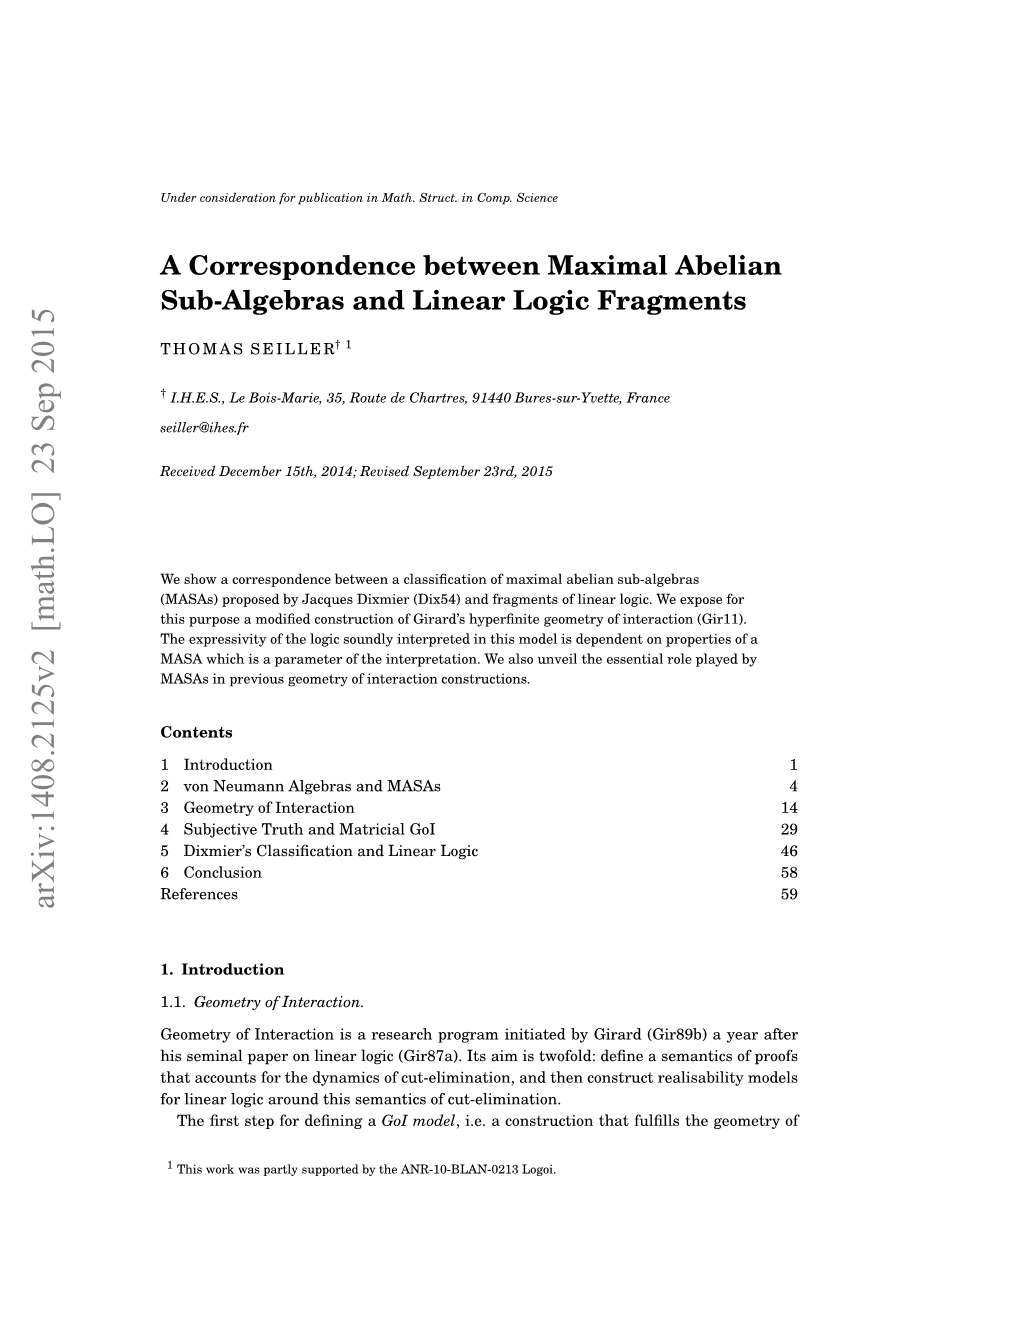 A Correspondence Between Maximal Abelian Sub-Algebras and Linear